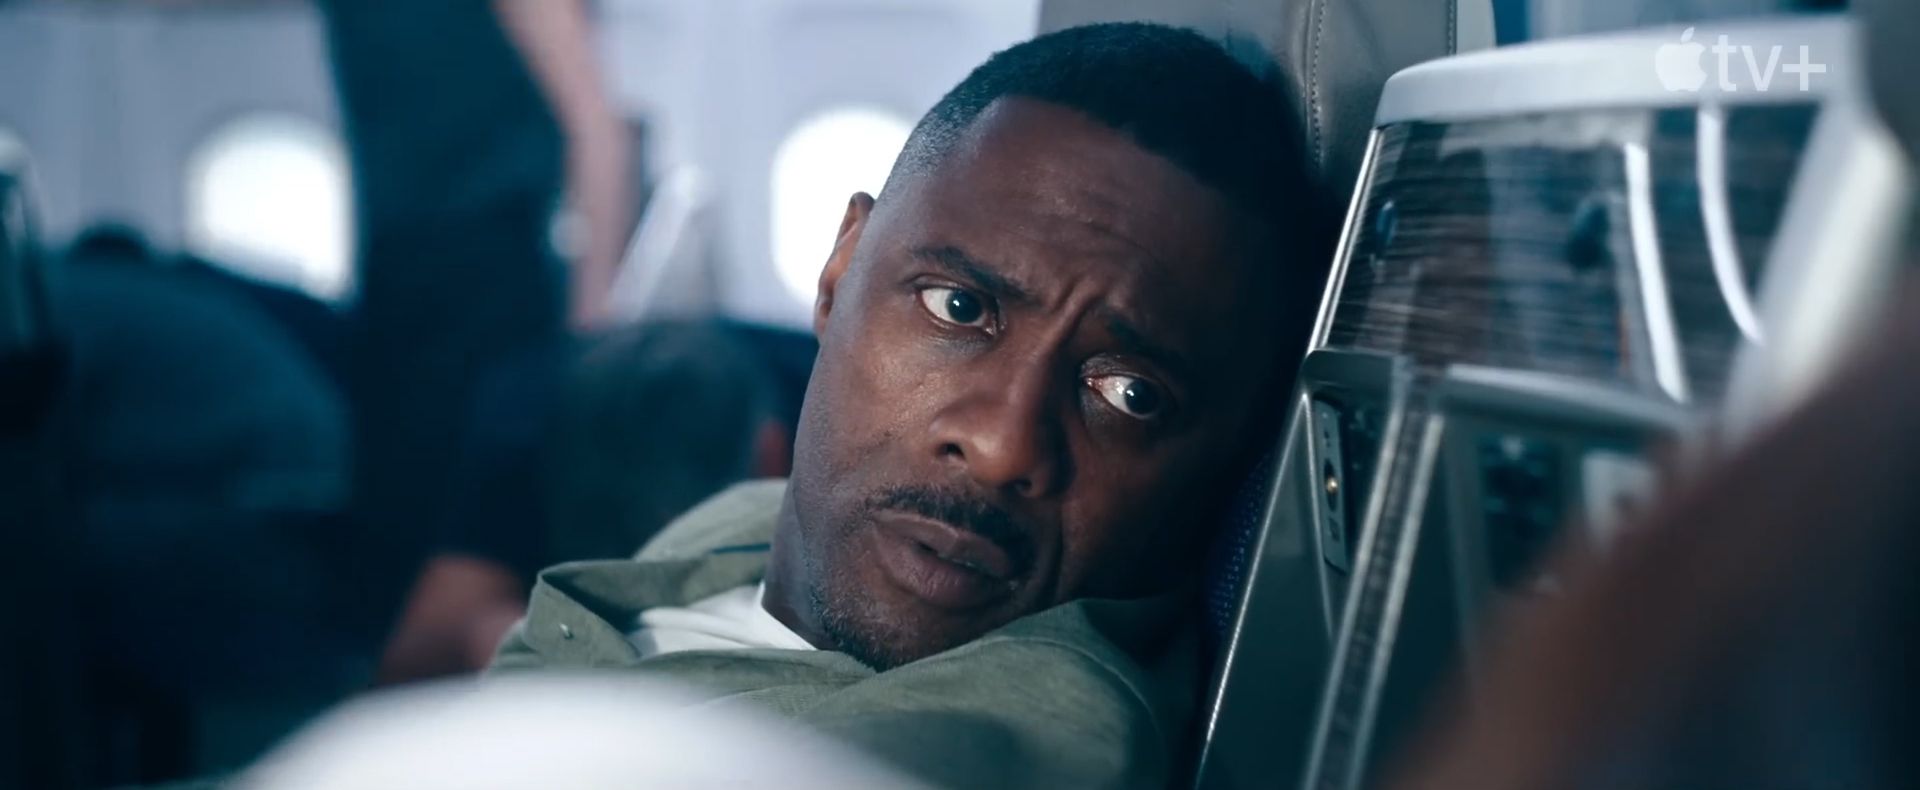 Hijack,' Starring Idris Elba, Is a Relatable Thriller for the Travel-Weary